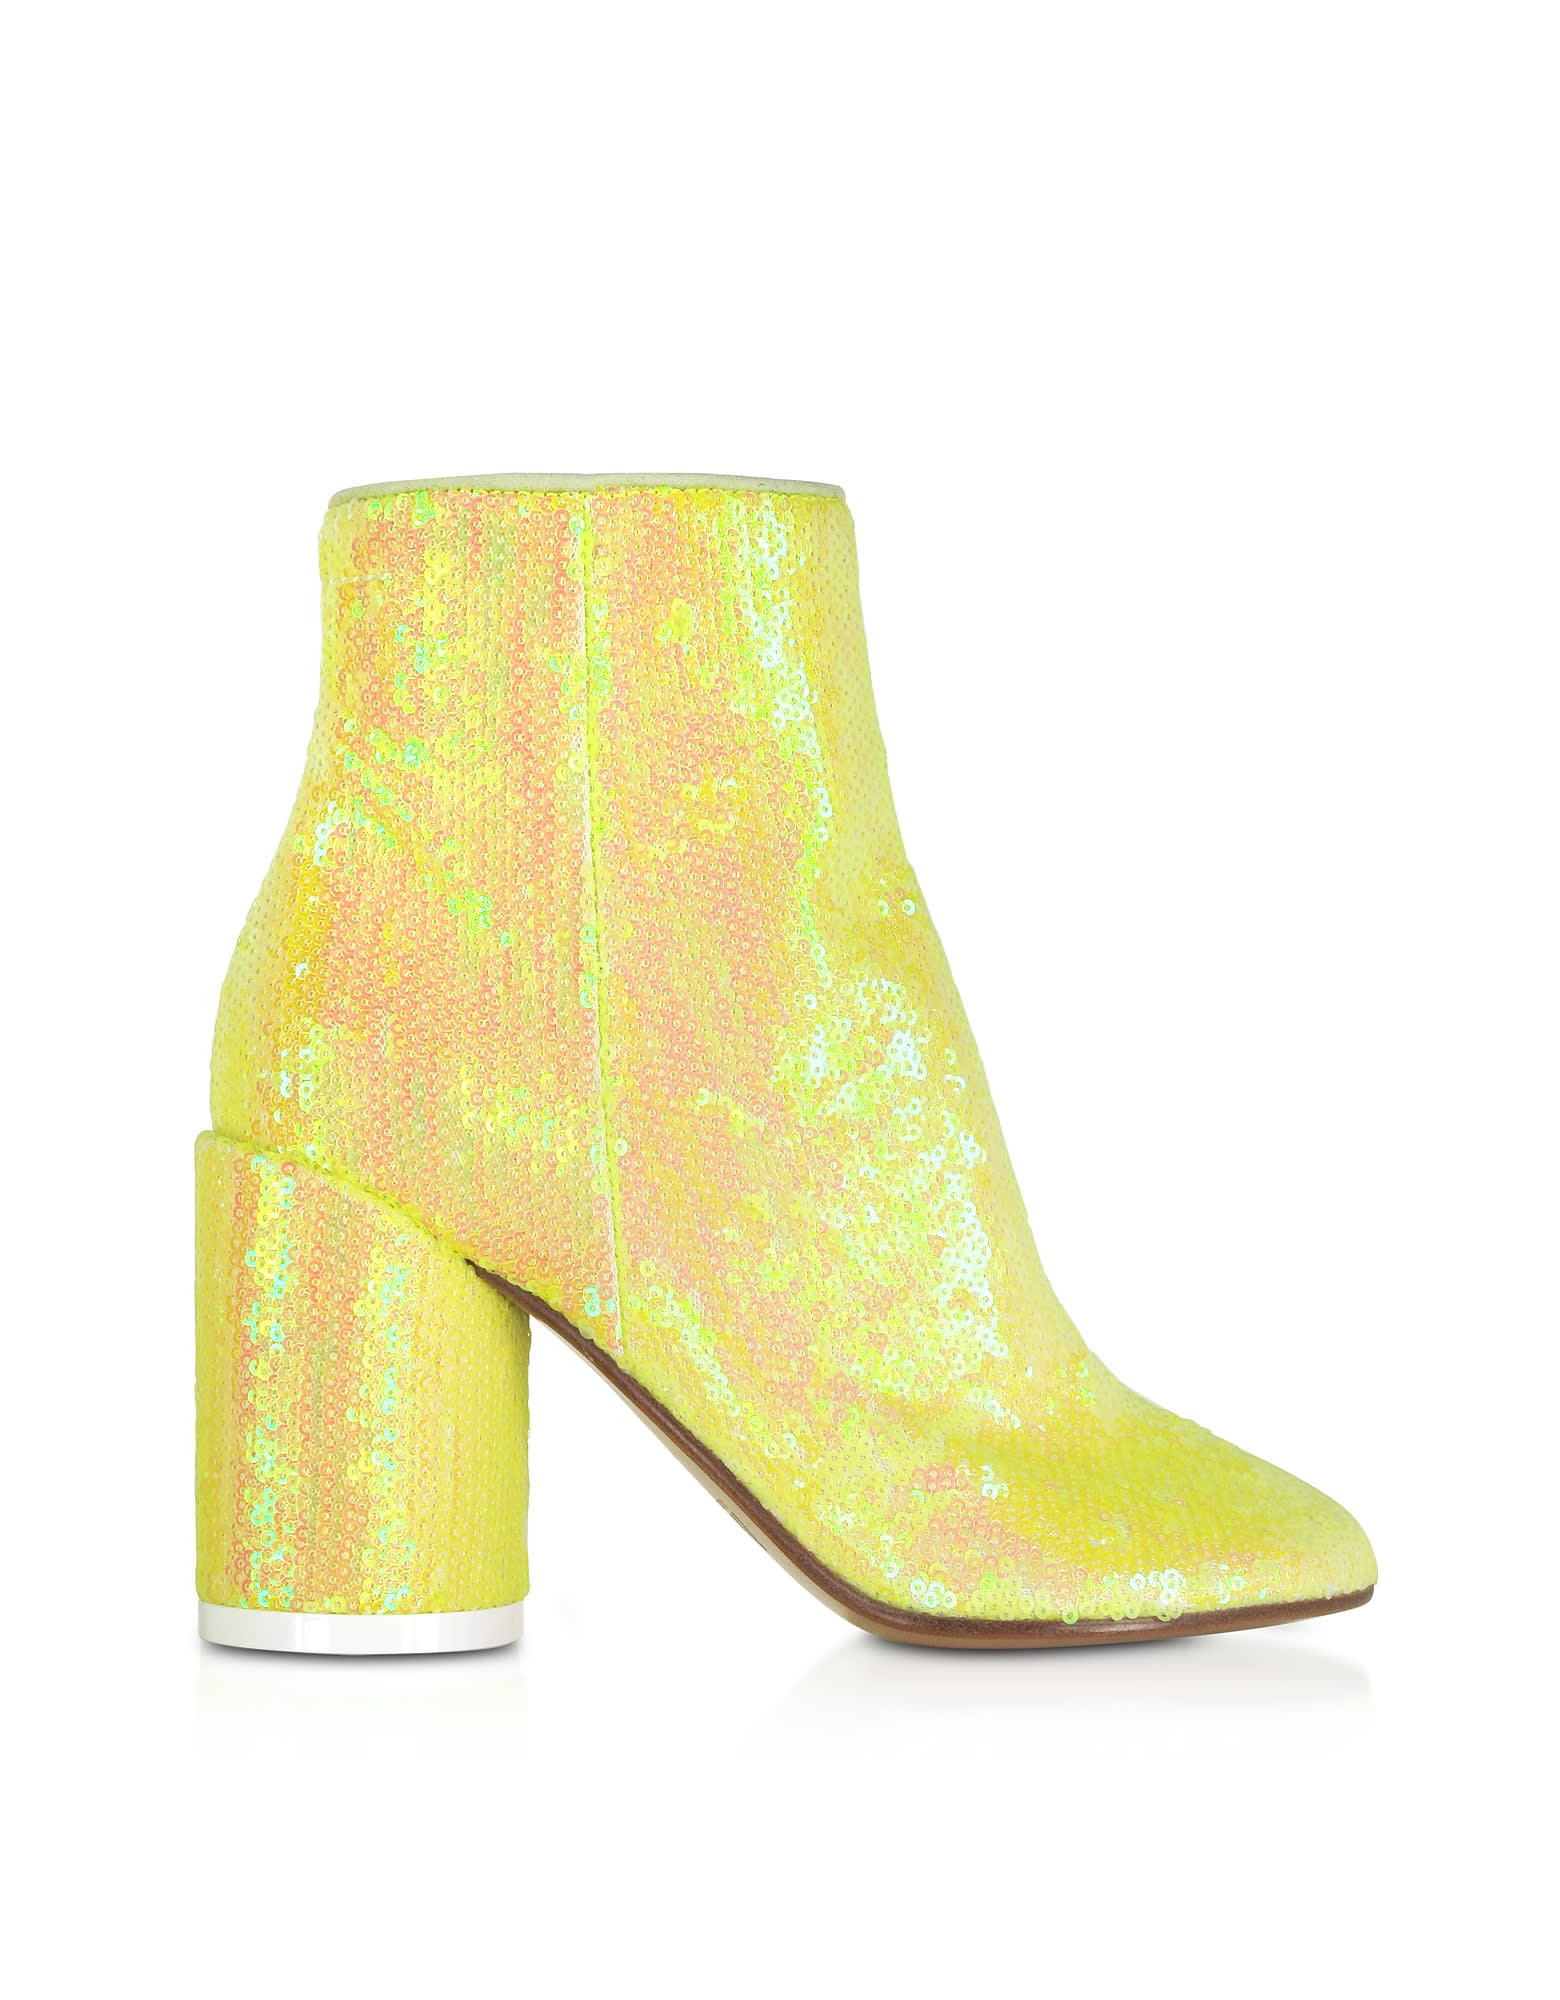 MM6 MAISON MARGIELA BLAZING YELLOW SEQUINS AND SUEDE BOOTS